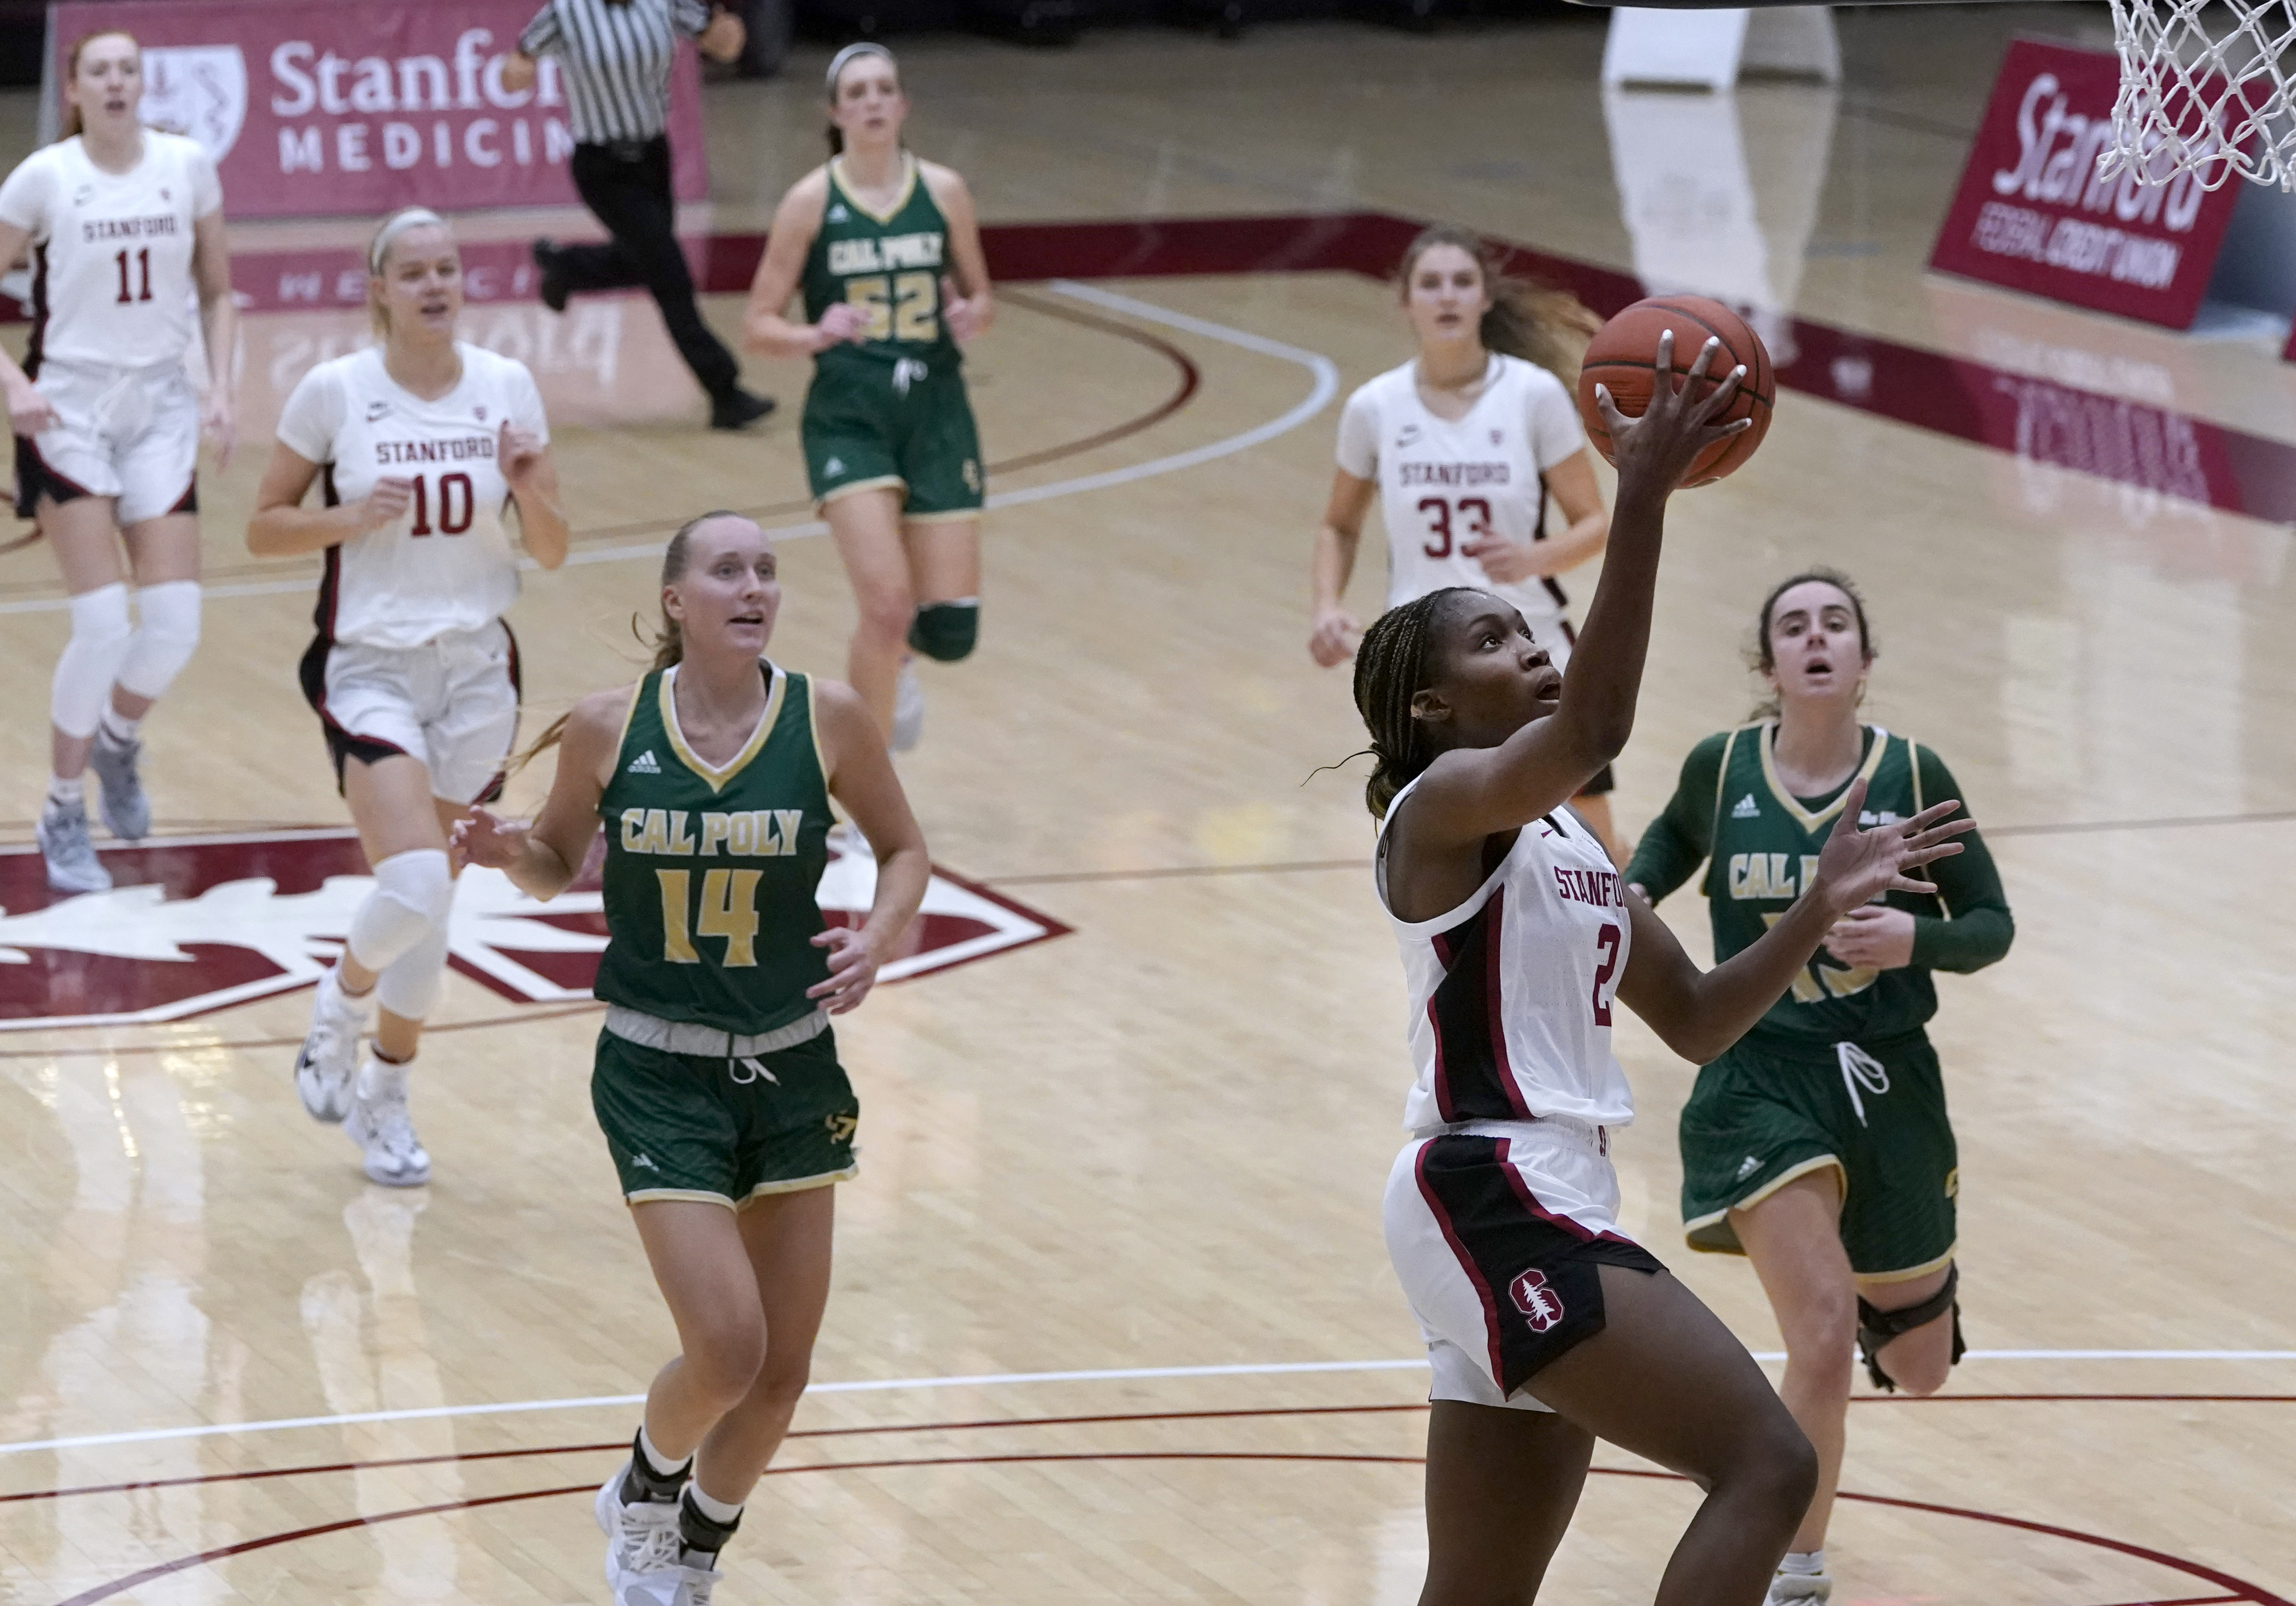 Stanford guard Agnes Emma-Nnopu drives to the basket against Cal Poly during the second half of an NCAA college basketball game in Stanford, Calif., Wednesday, Nov. 25, 2020. Stanford won 108-40. (AP Photo/Tony Avelar)